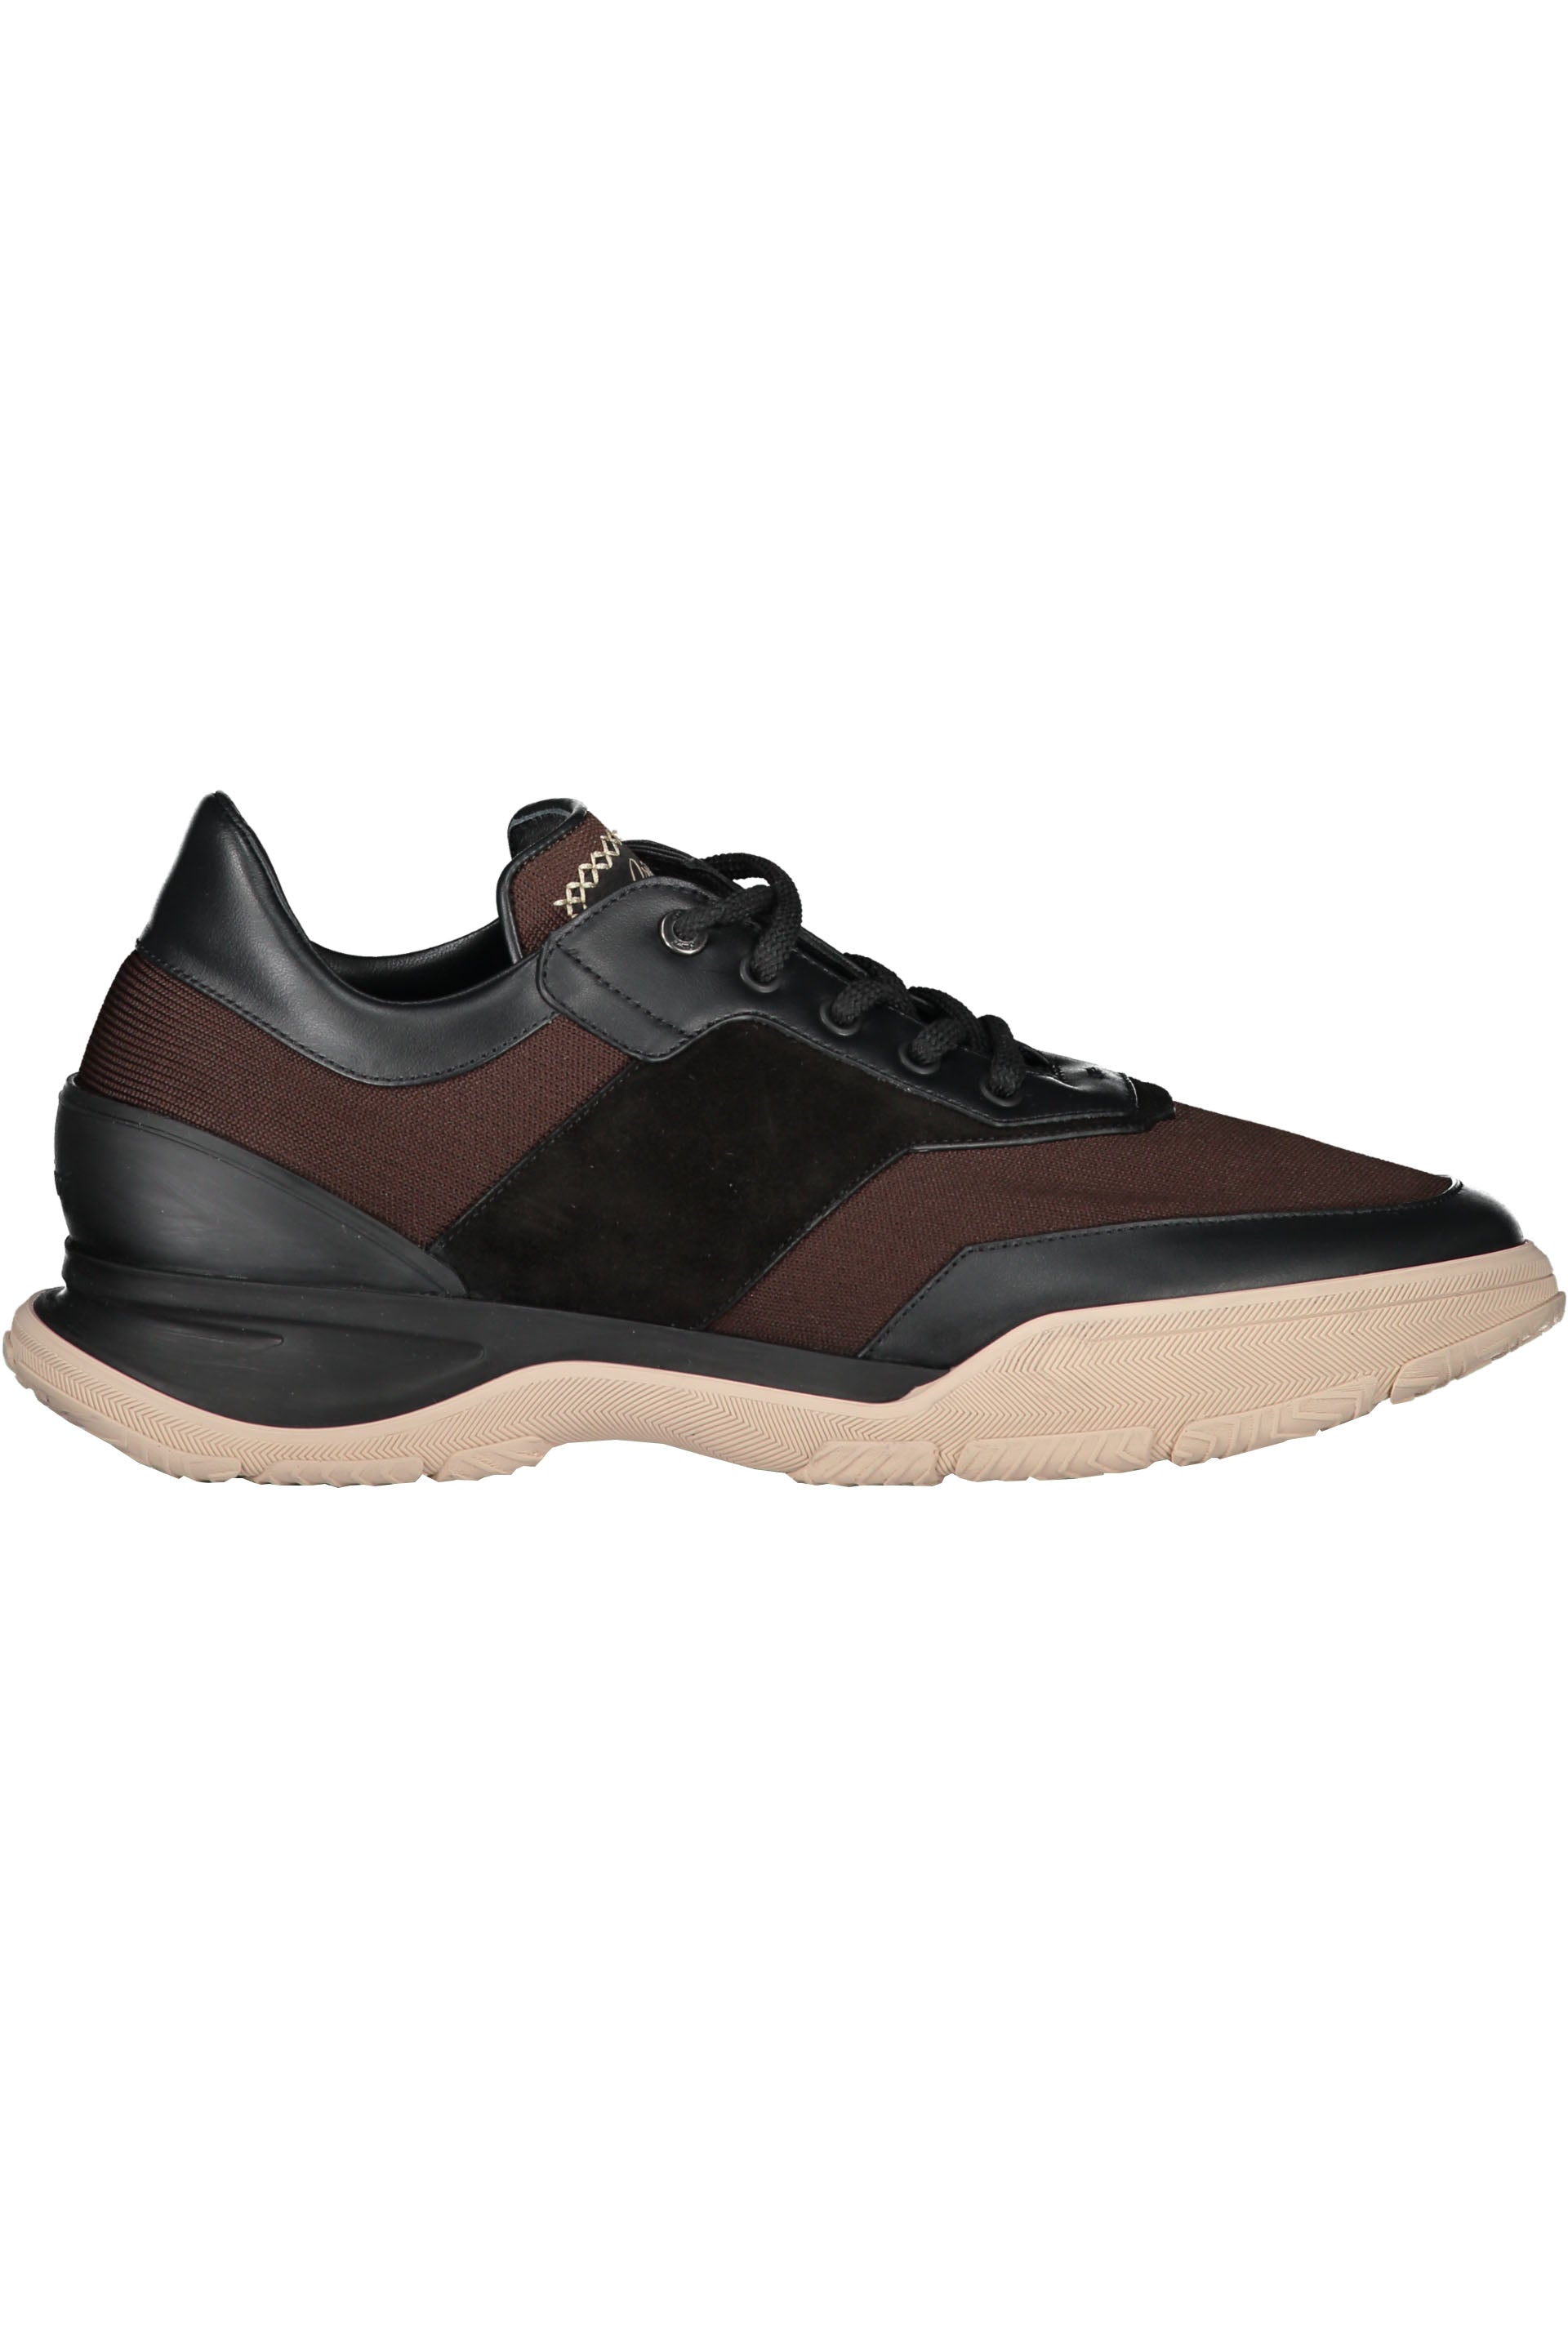 BRIONI-OUTLET-SALE-Leather-sneakers-Sneakers-10-ARCHIVE-COLLECTION_7b556bb5-c1ce-4ce5-a2b0-969f61720378.jpg